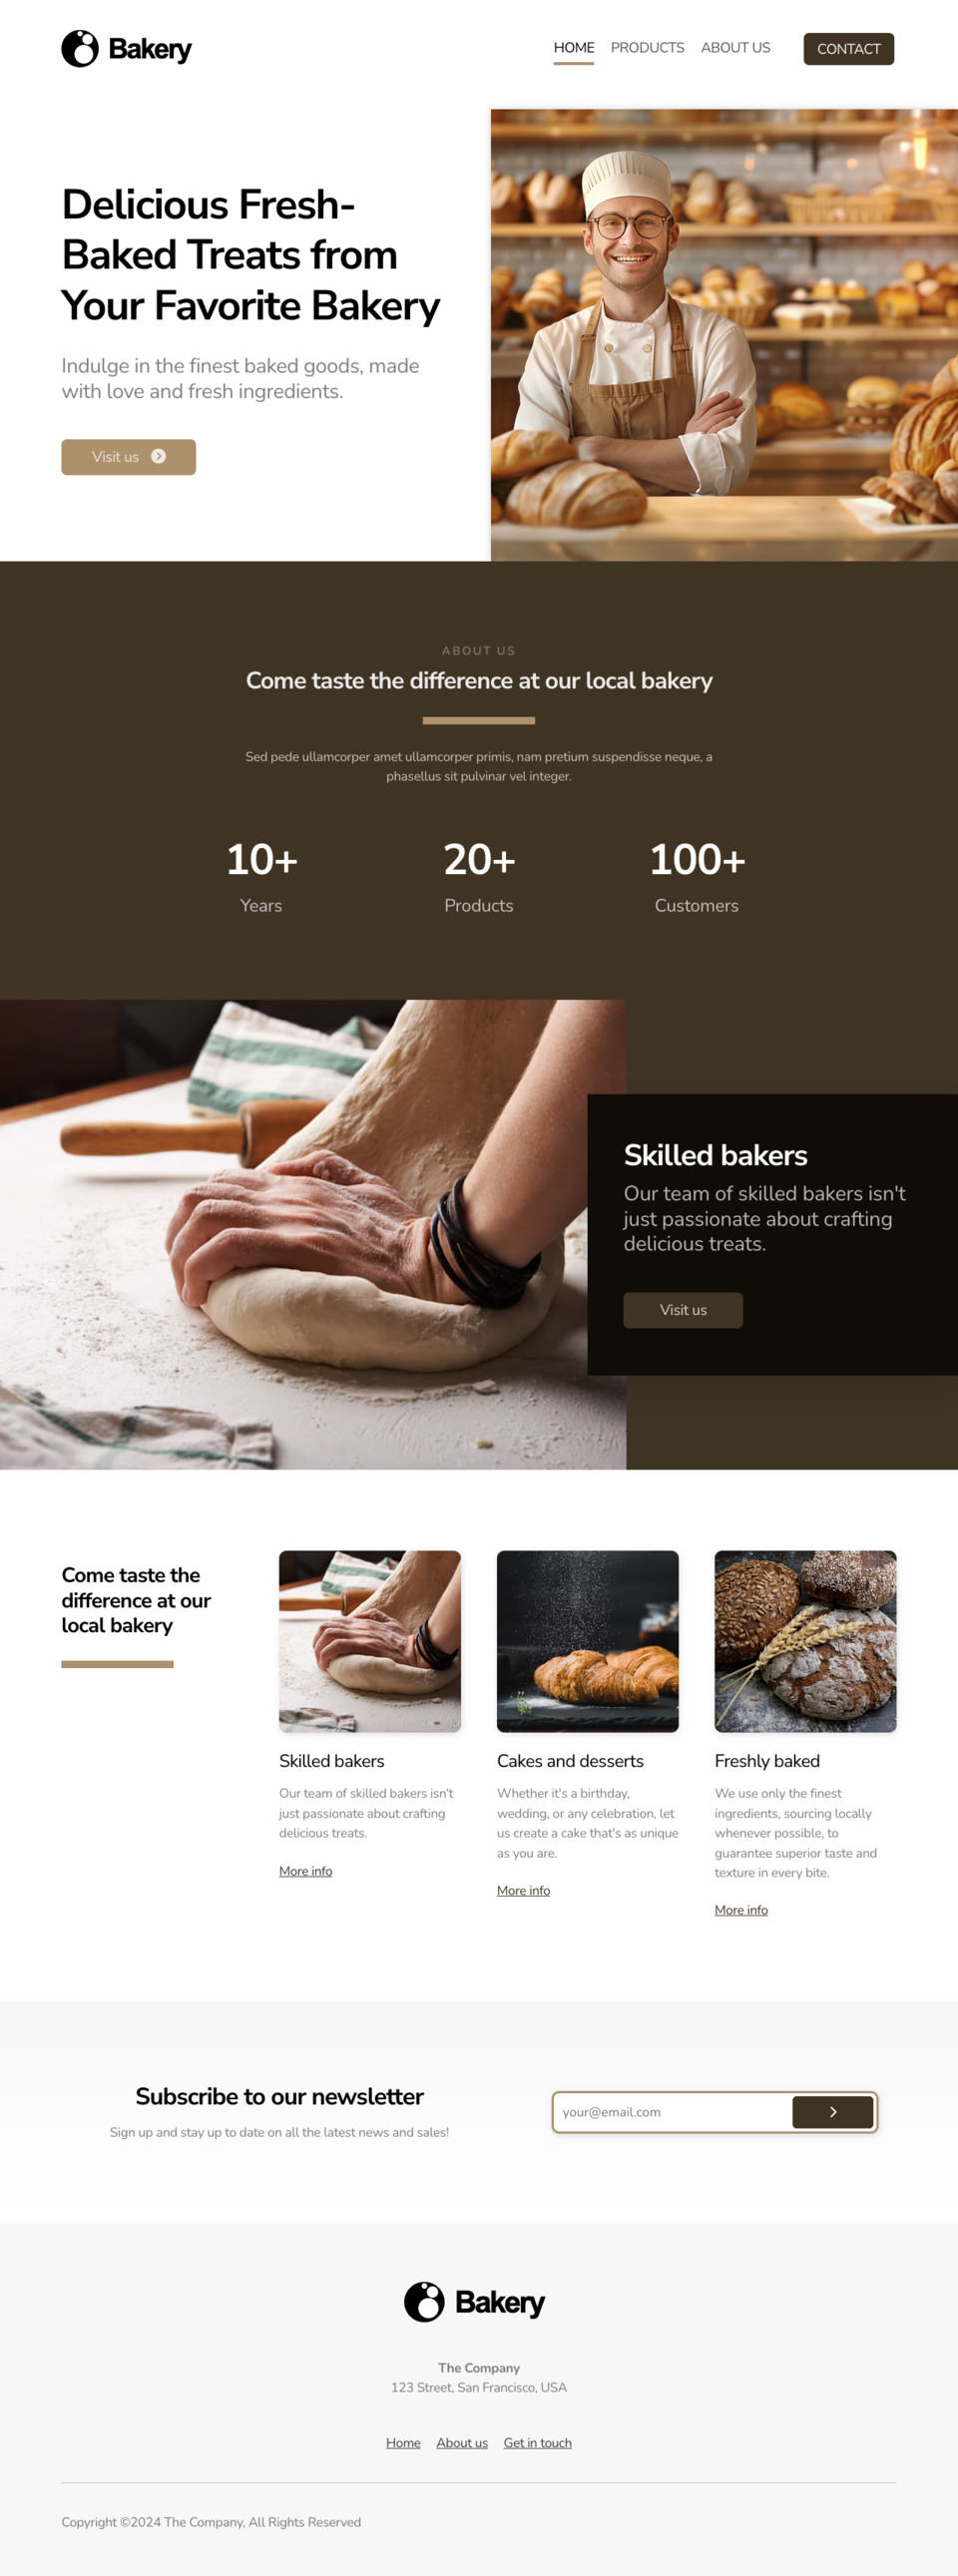 Bakery Website Template - Ideal for bakery owners, cake shops, pastry businesses, and other food-related small businesses.